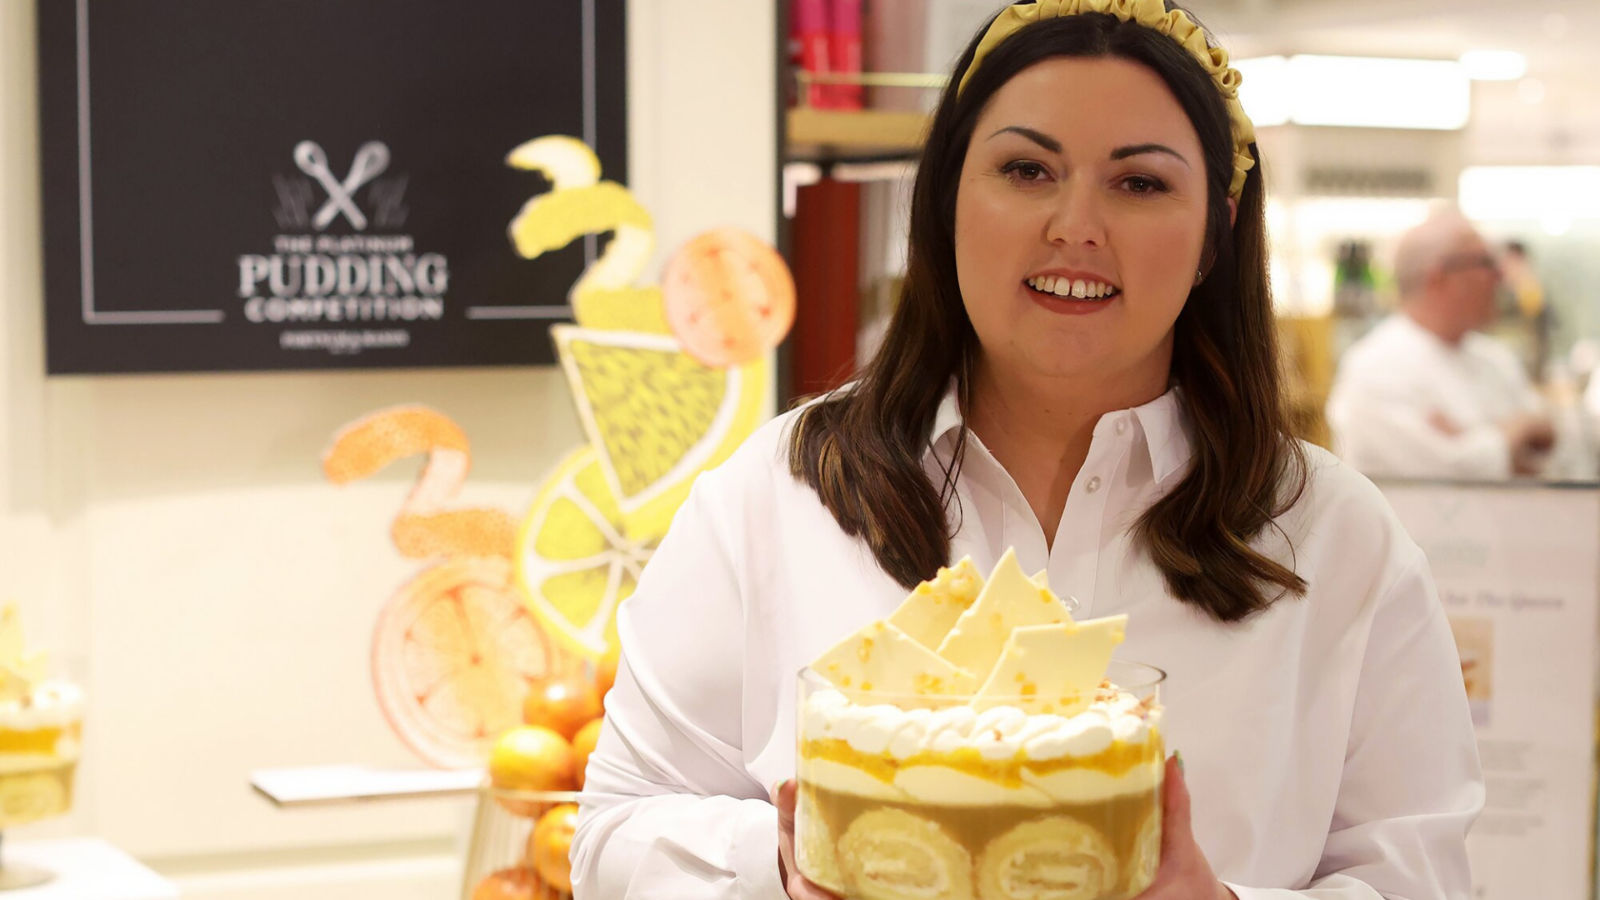 This trifle is the official dessert of Queen Elizabeth’s Platinum Jubilee